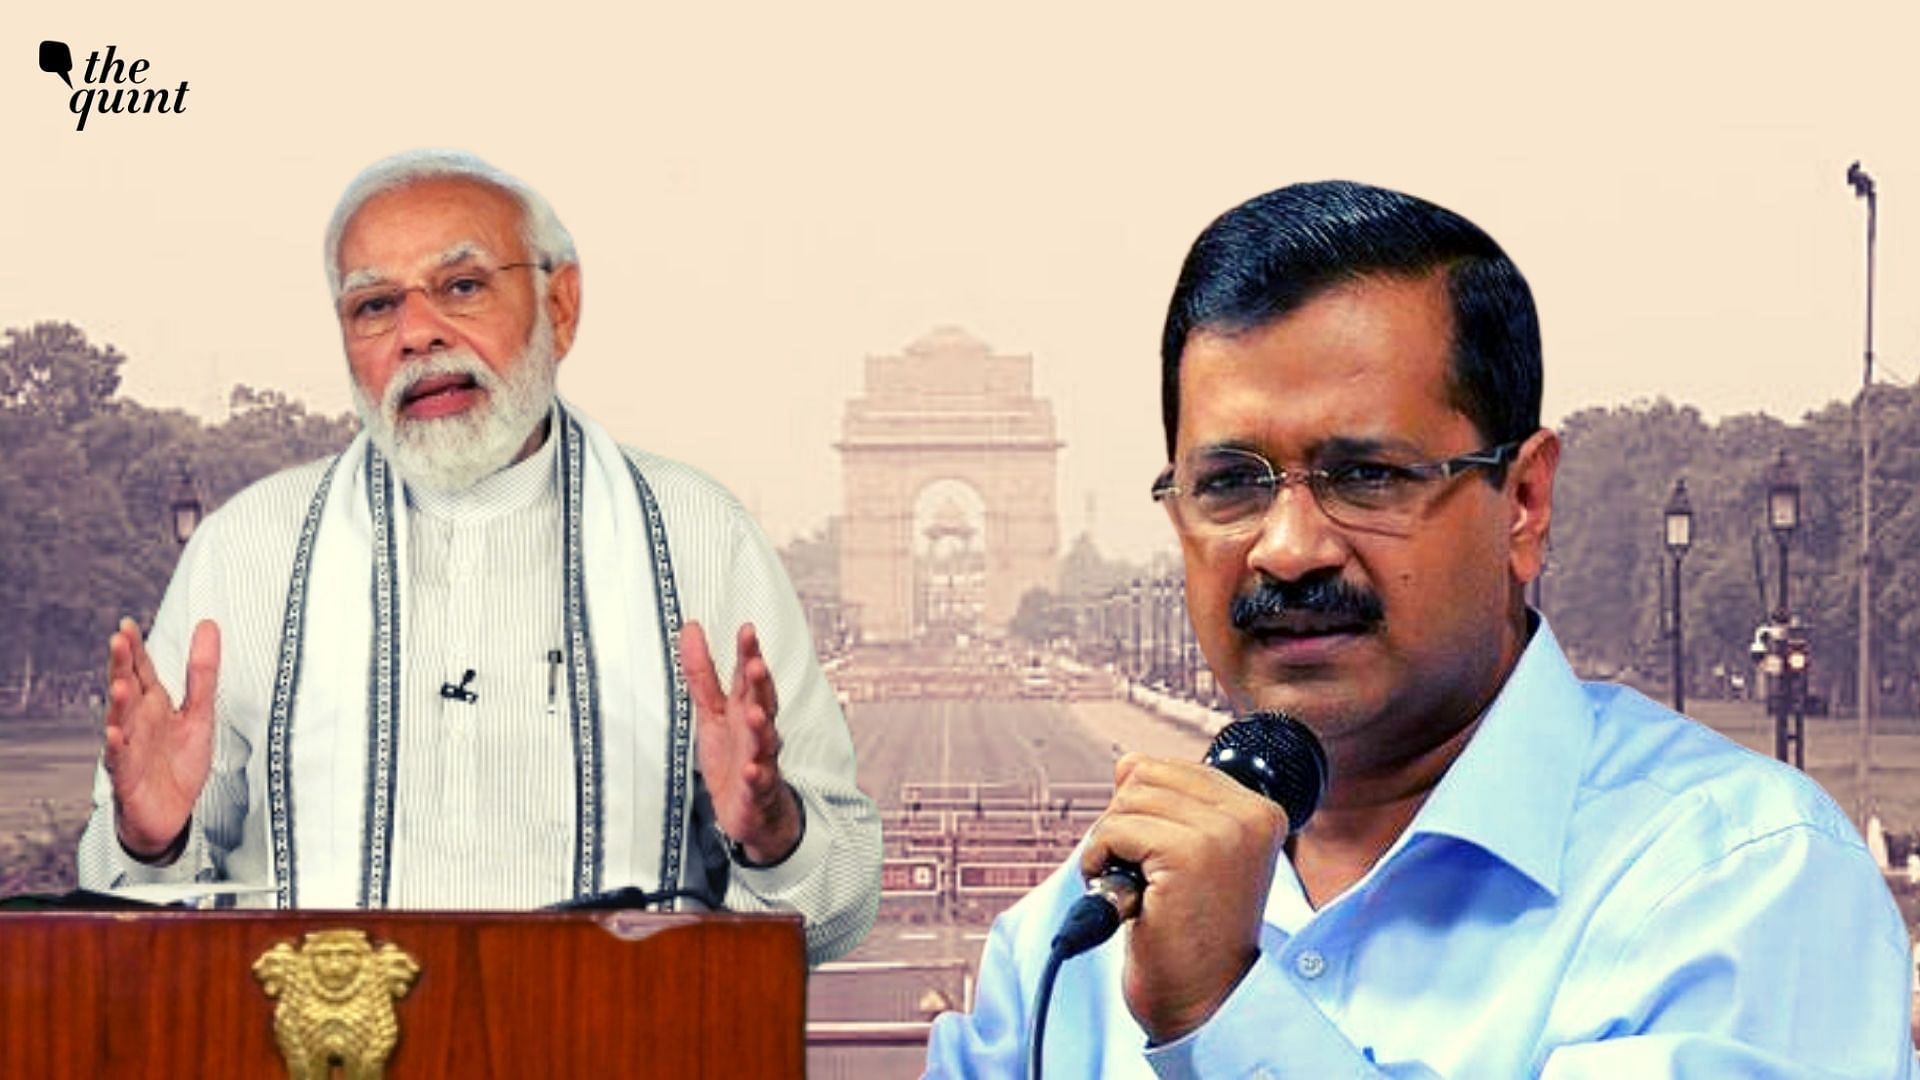 <div class="paragraphs"><p>While the Bharatiya Janata Party has welcomed the Centre’s approval, the <a href="https://www.thequint.com/news/india/murder-of-democracy-aam-aadmi-party-supreme-court-delhi-municipal-polls#read-more">Aam Aadmi Party</a>&nbsp;– which is in power in Delhi – has pointed that, “BJP had seven years for this unification, but the way they have postponed the polls is not good for democracy.”</p></div>